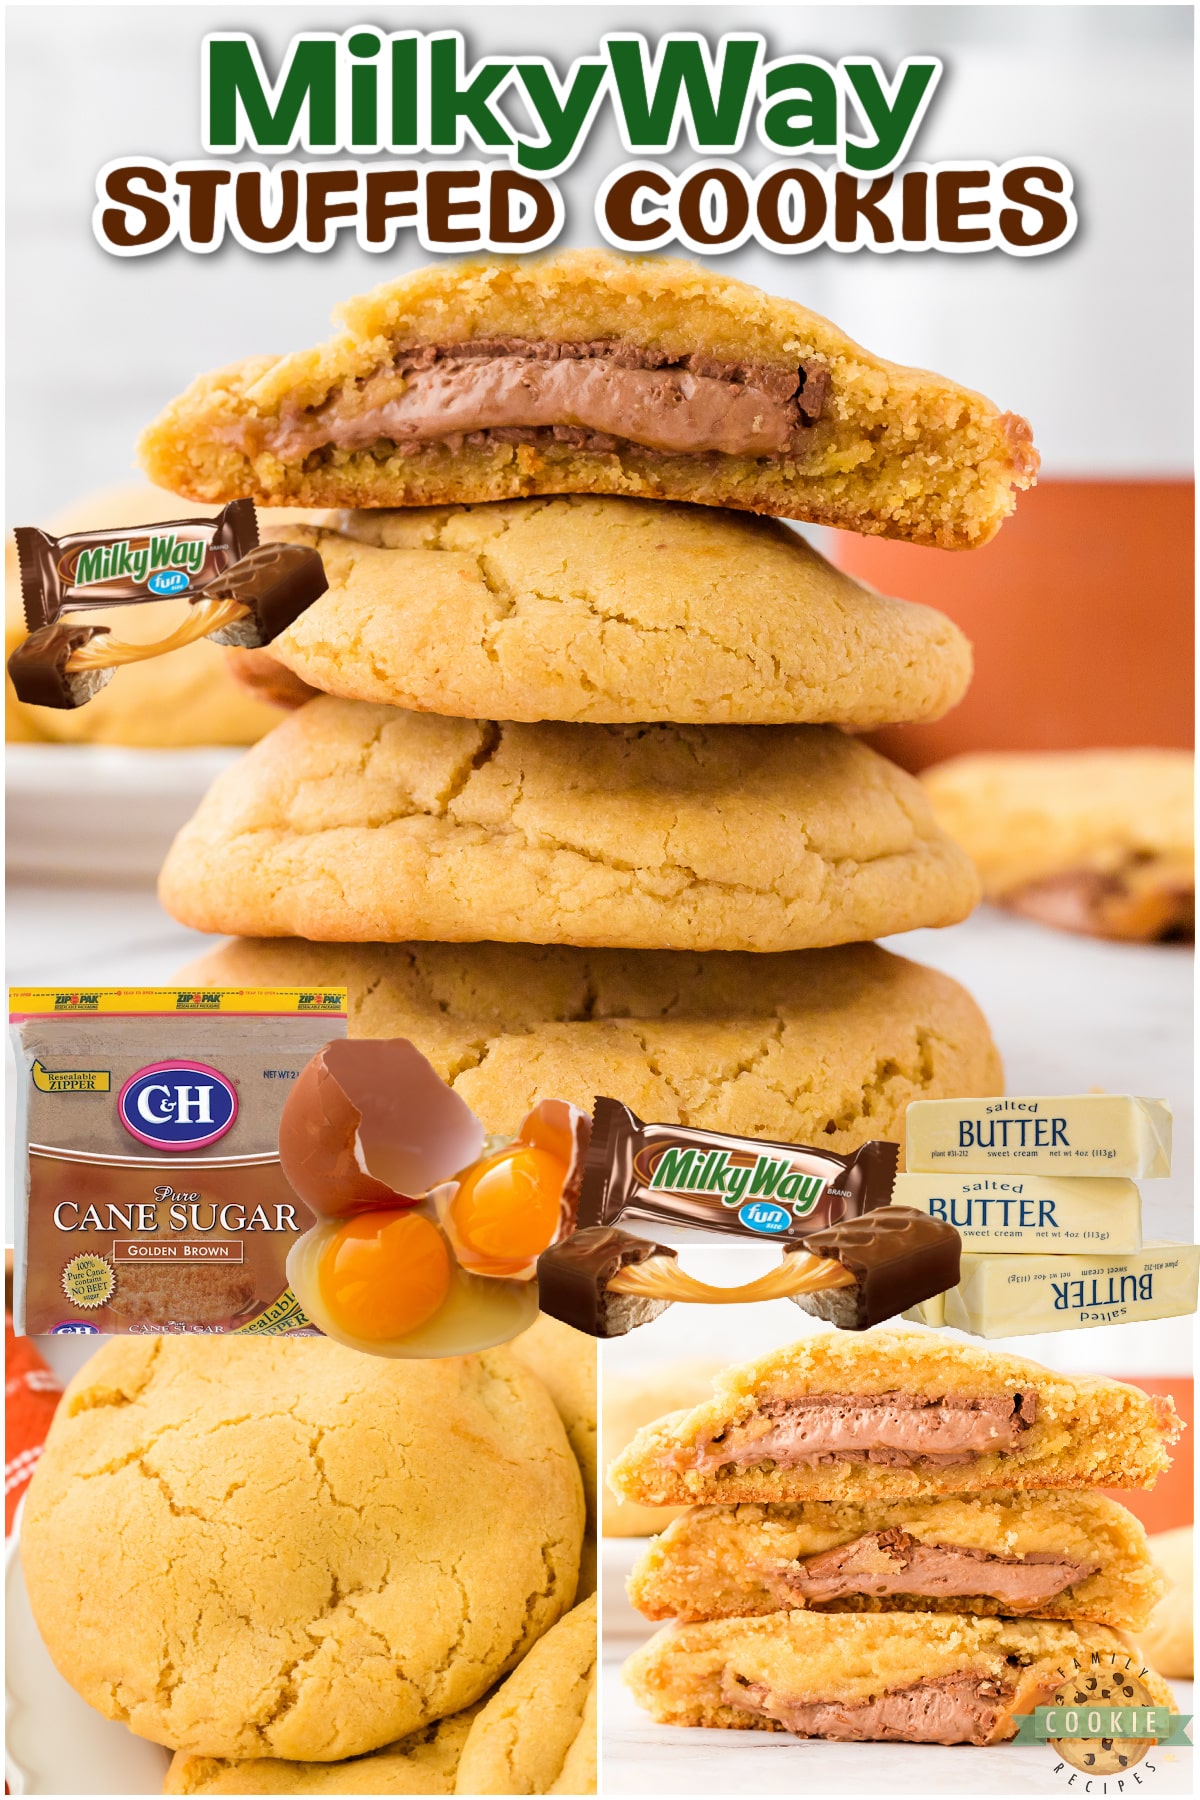 Bakery Style Milky Way Cookies made with sweet cookie dough and stuffed with the classic chocolate caramel nougat candies. Stuffed cookies are a perfect treat!